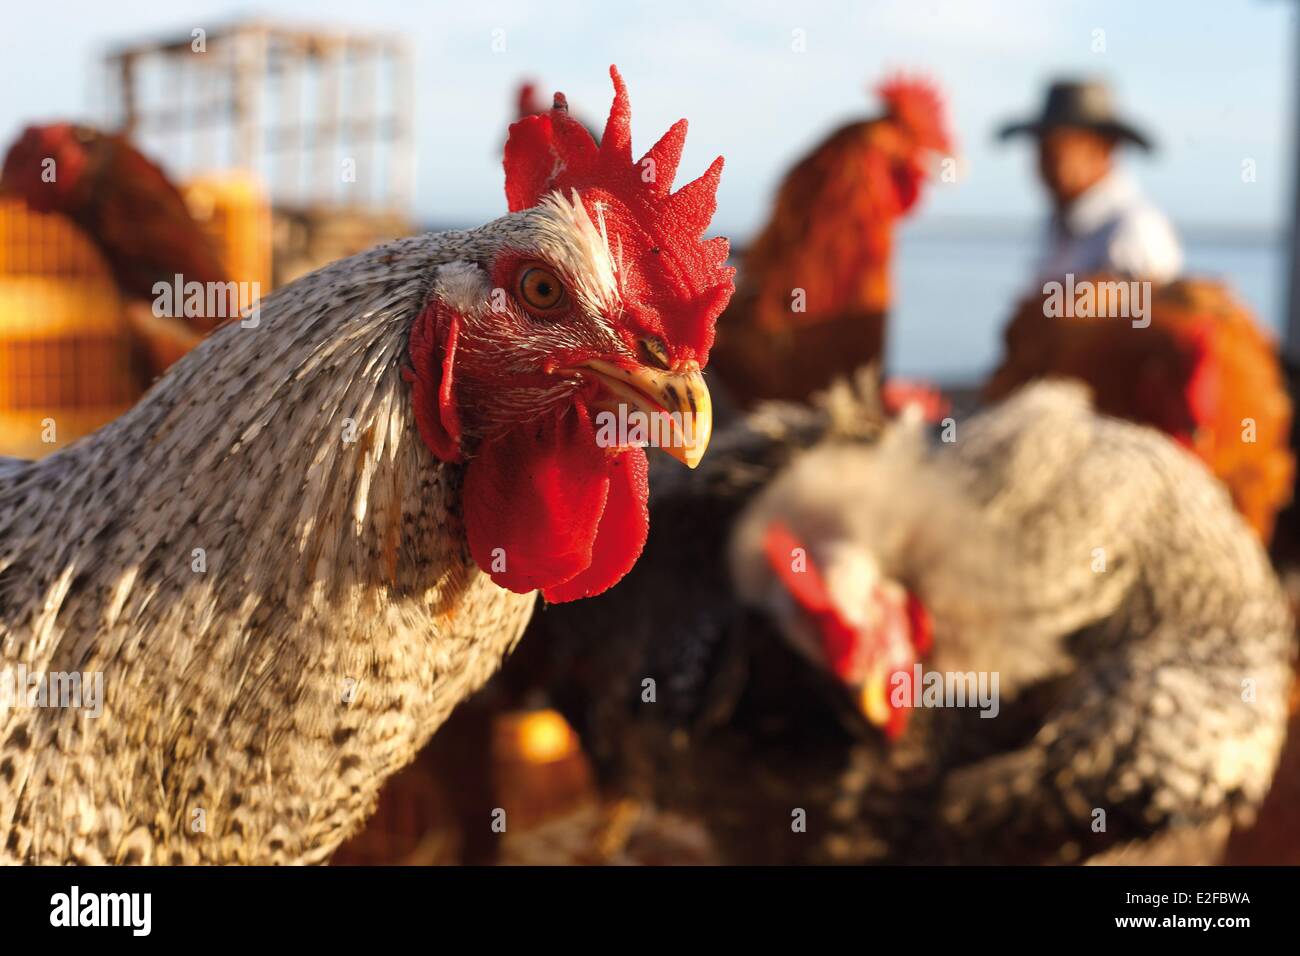 France Reunion island (French overseas department) Saint Paul portrait of a rooster on a stand selling Reunion Creole chickens Stock Photo